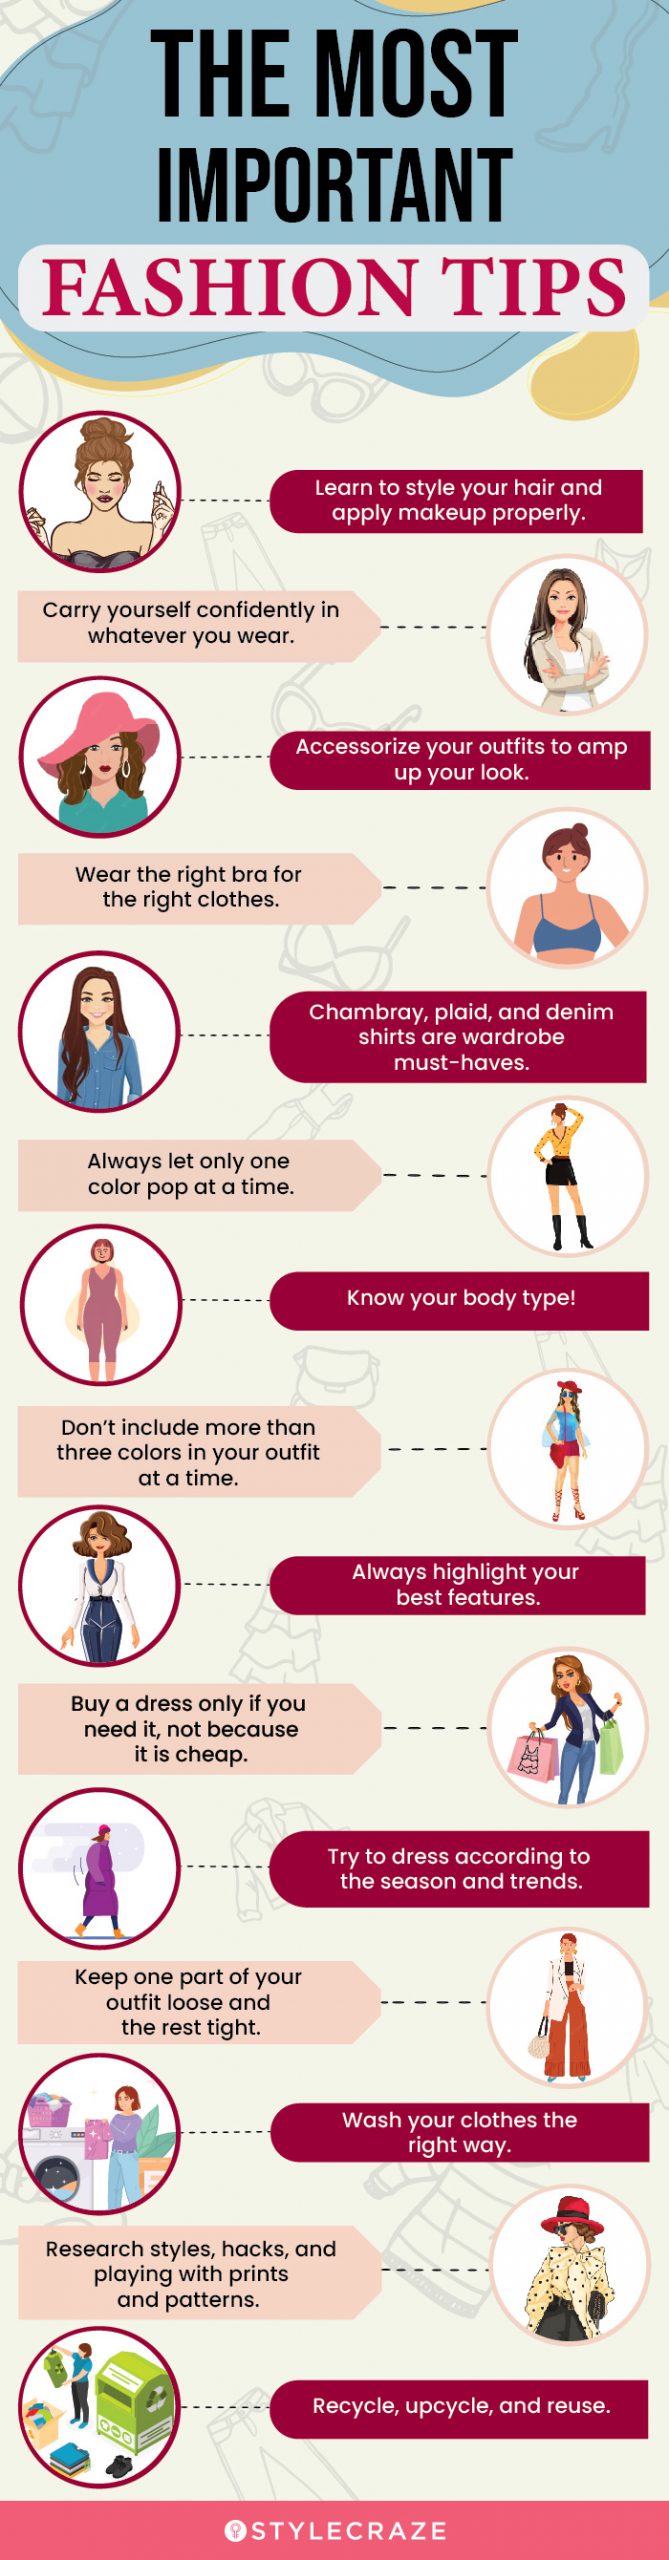 the most important fashion tips (infographic)